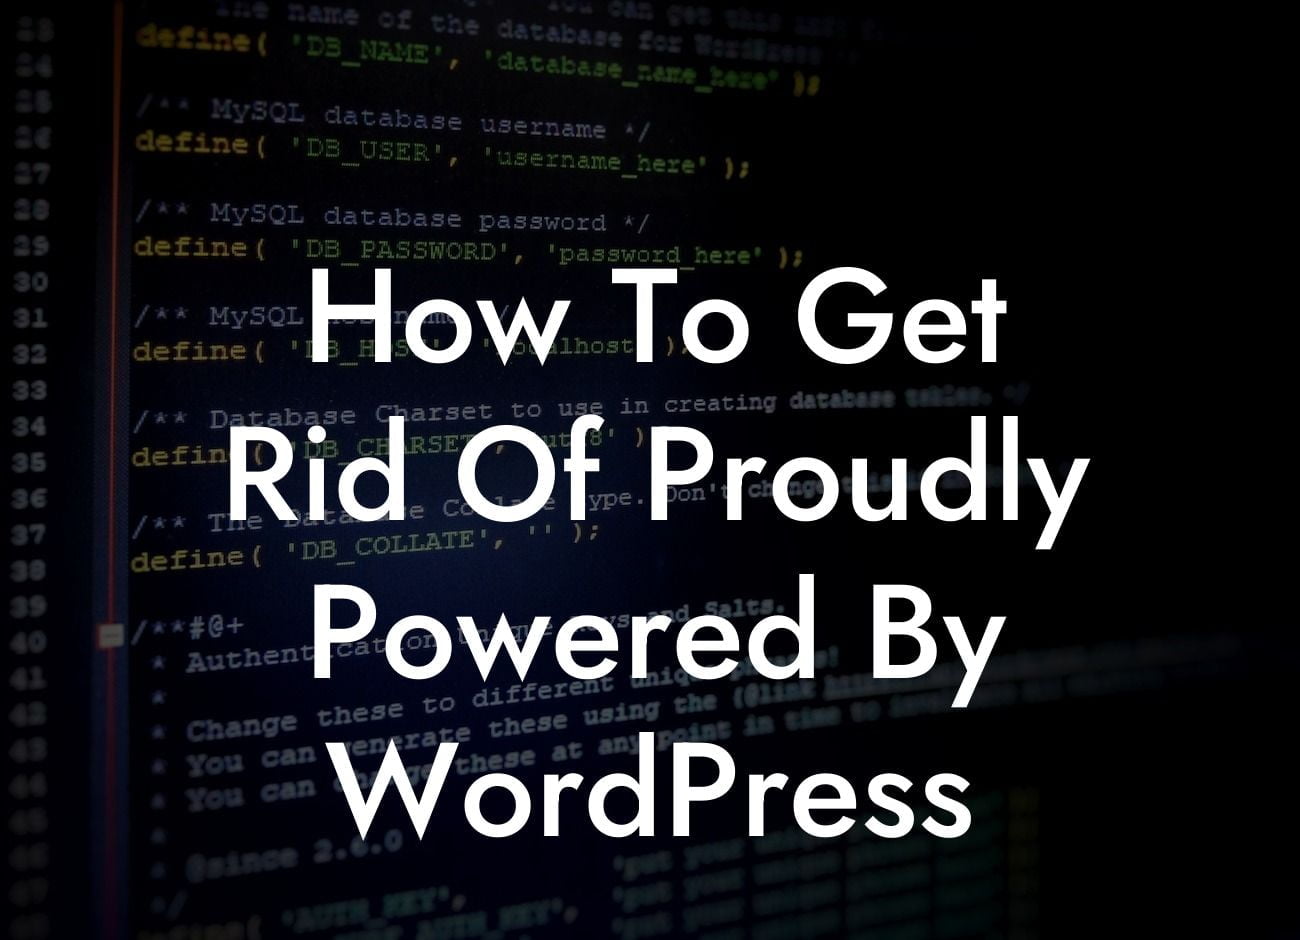 How To Get Rid Of Proudly Powered By WordPress